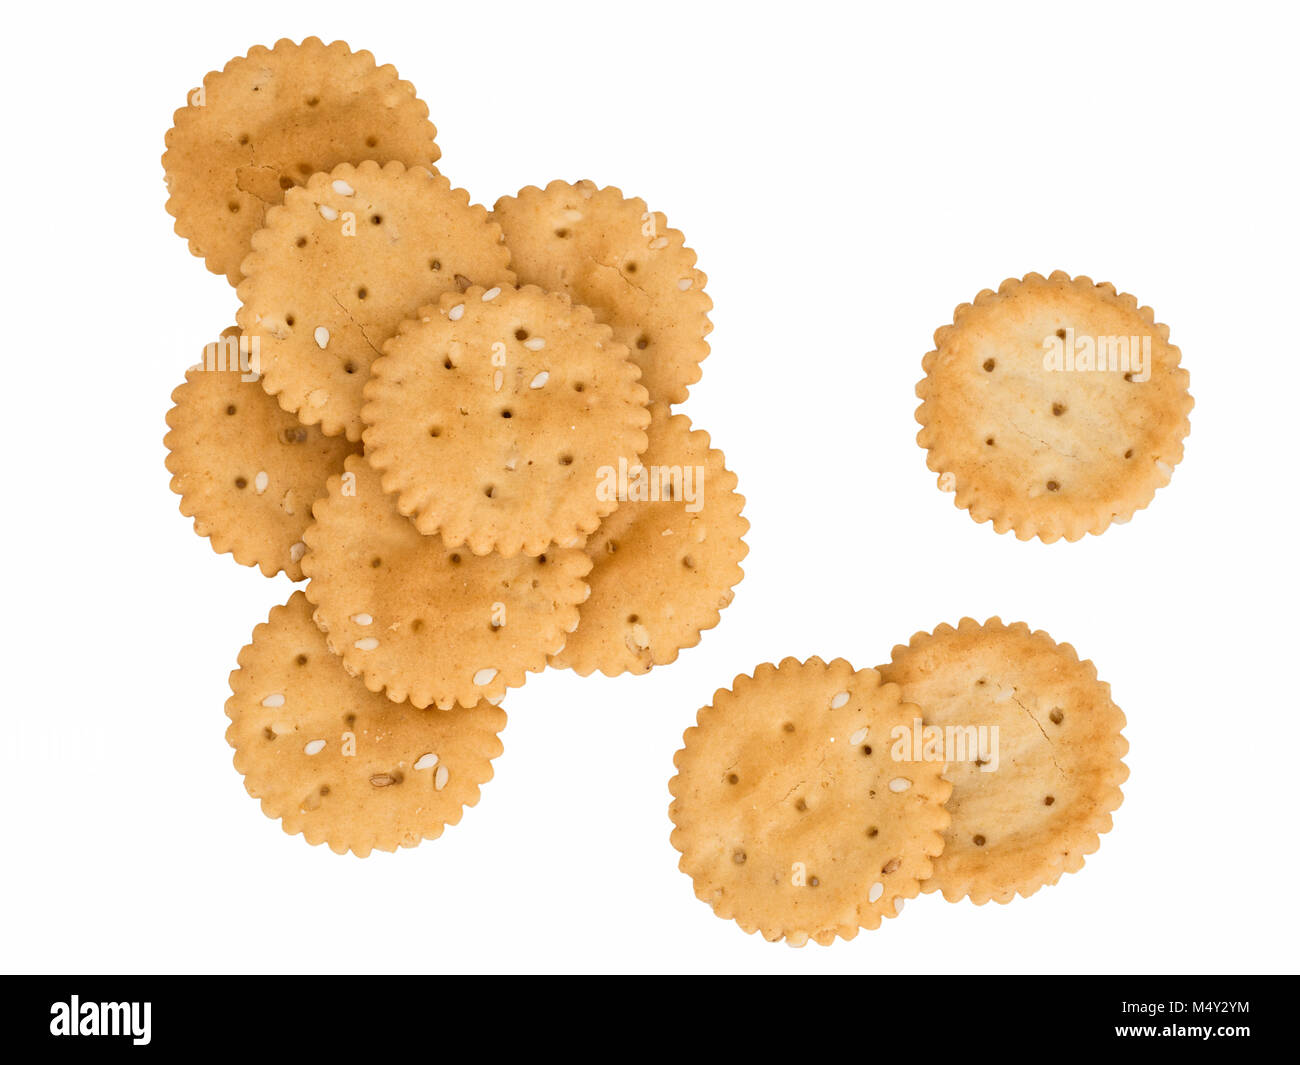 Gluten free crackers. Small tasty savoury biscuits with sesame seeds. Stock Photo